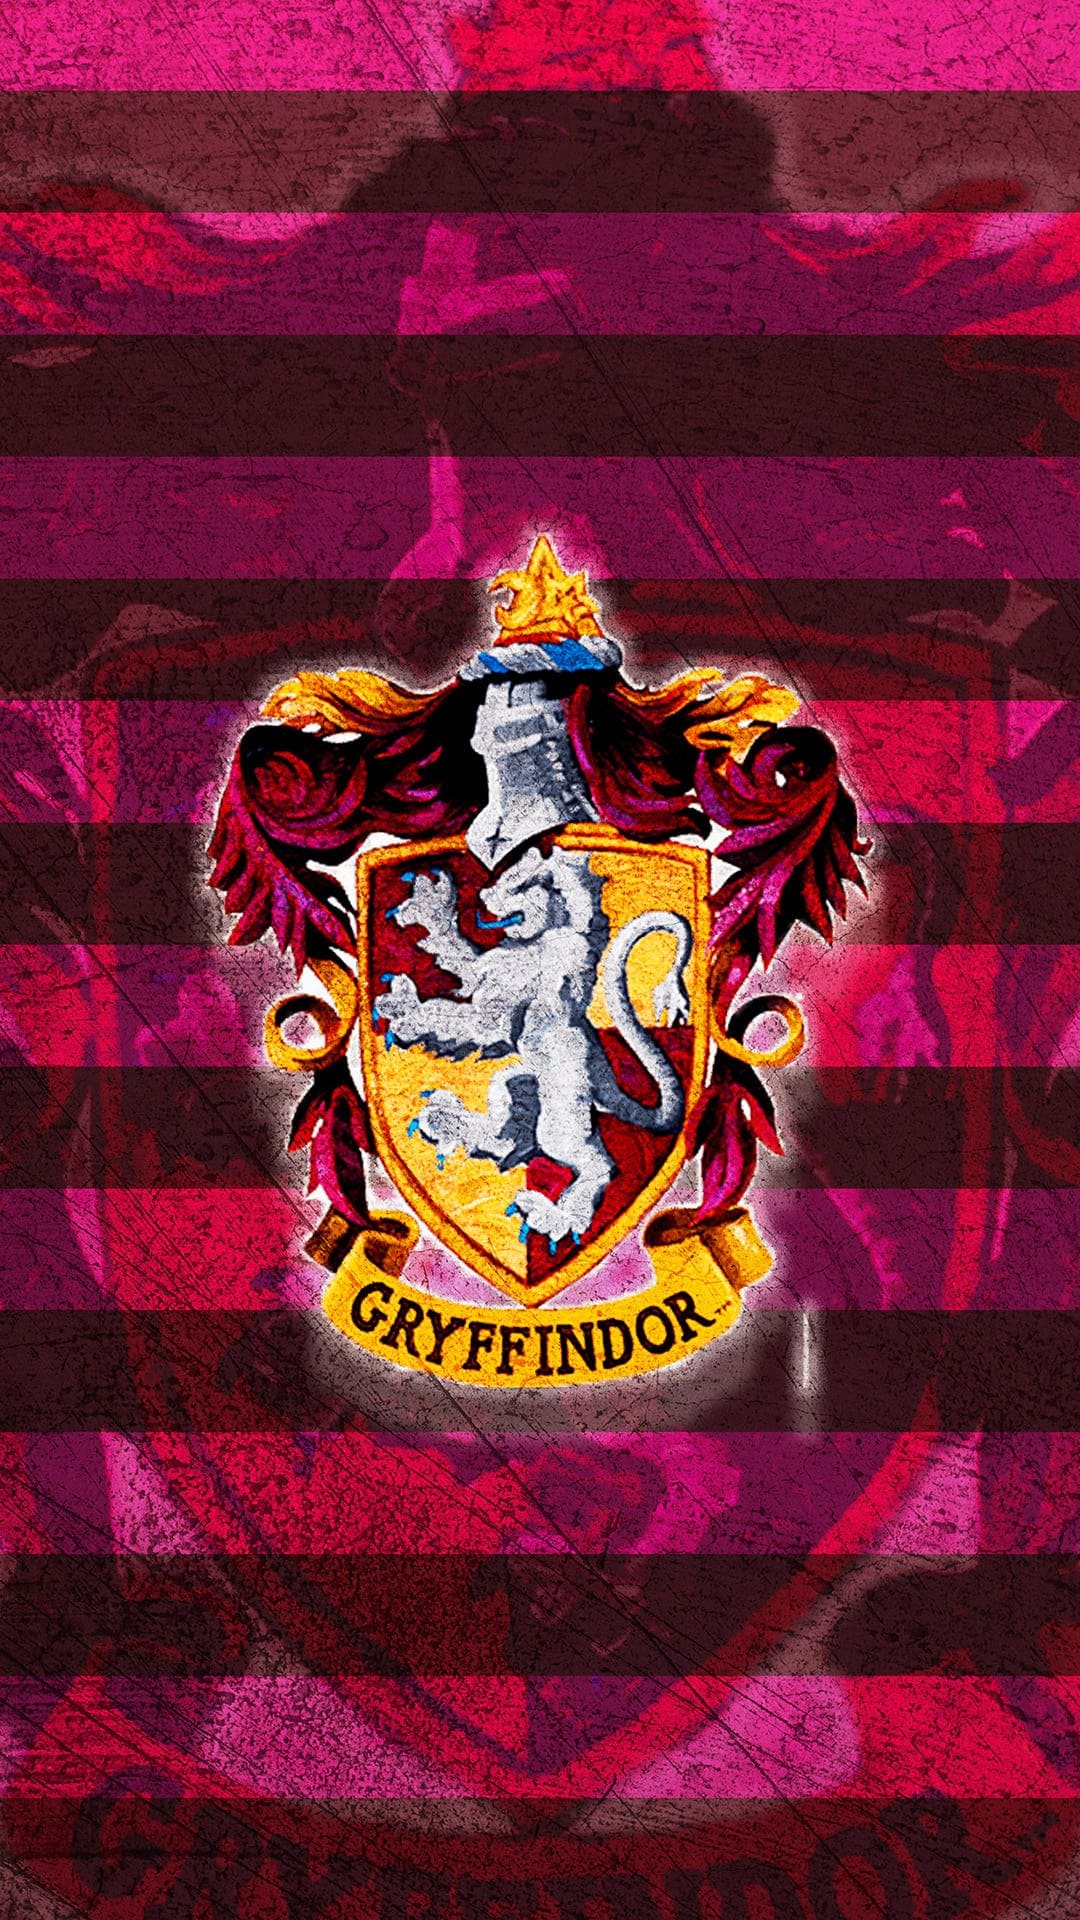 IPhone wallpaper gryffindor with high-resolution 1080x1920 pixel. You can use this wallpaper for your iPhone 5, 6, 7, 8, X, XS, XR backgrounds, Mobile Screensaver, or iPad Lock Screen - Gryffindor